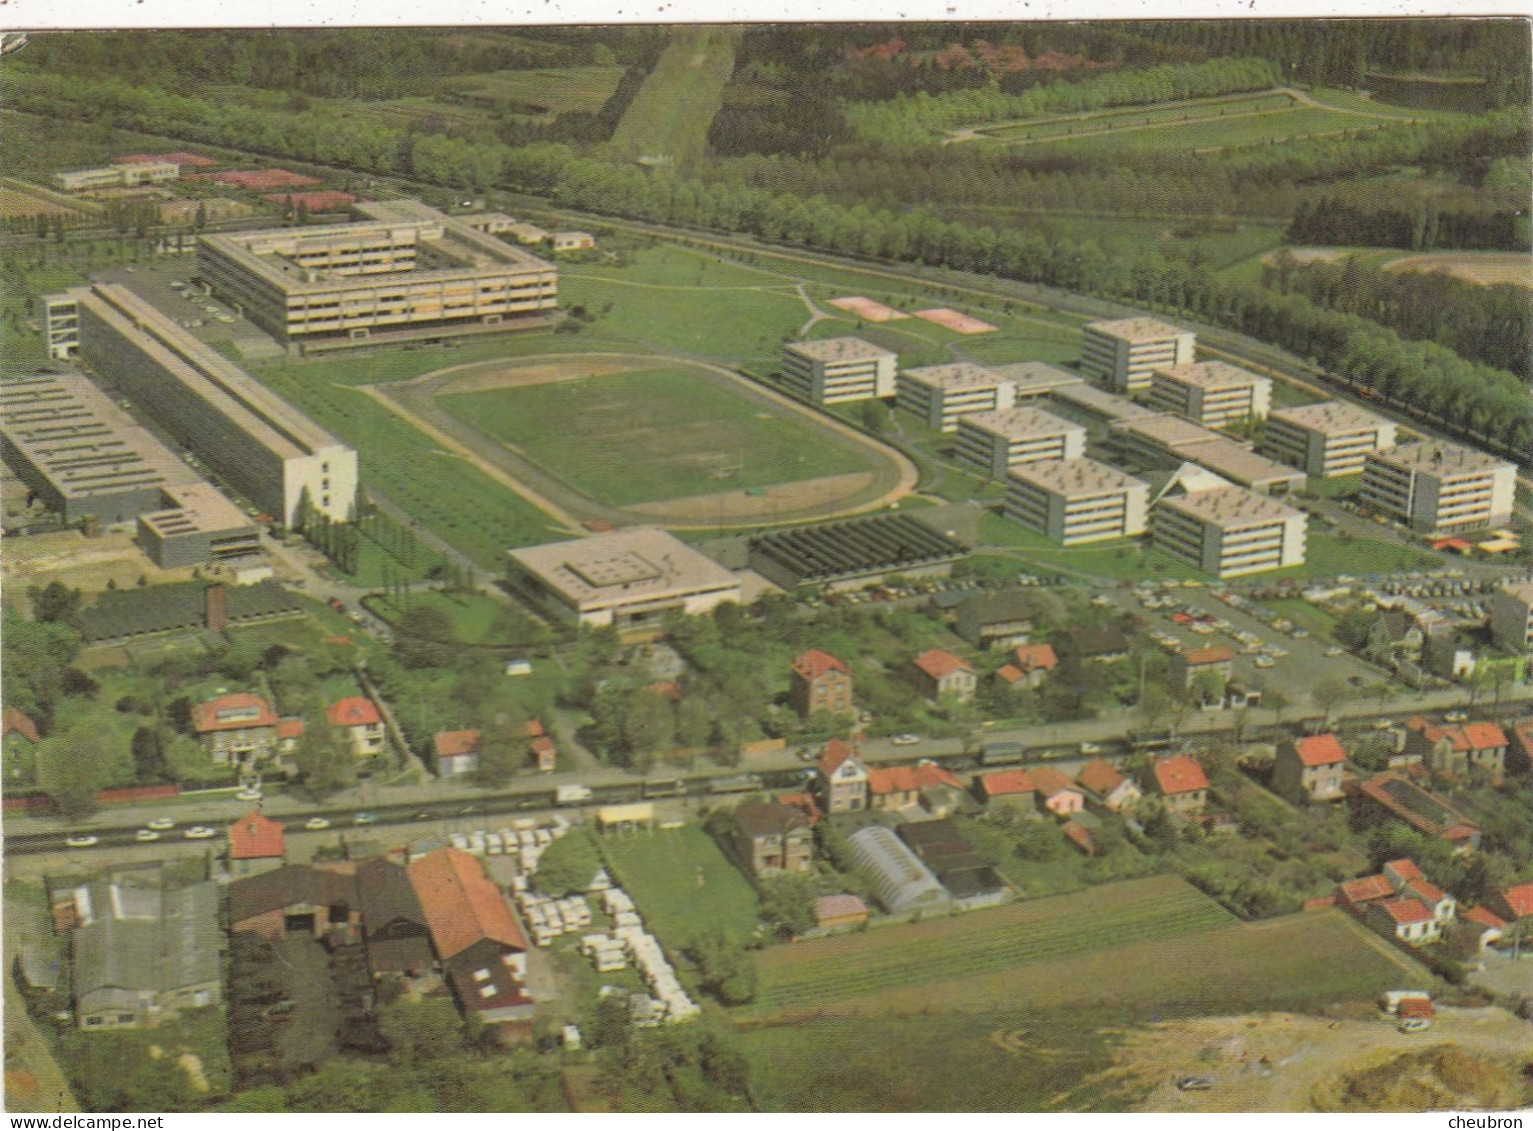 92. CHATENAY MALABRY. CPSM. VUE AERIENNE. L'ECOLE CENTRALE DES ARTS  ET MANUFACTURES. RESIDENCE DES ELEVES INGENIEURS. - Chatenay Malabry